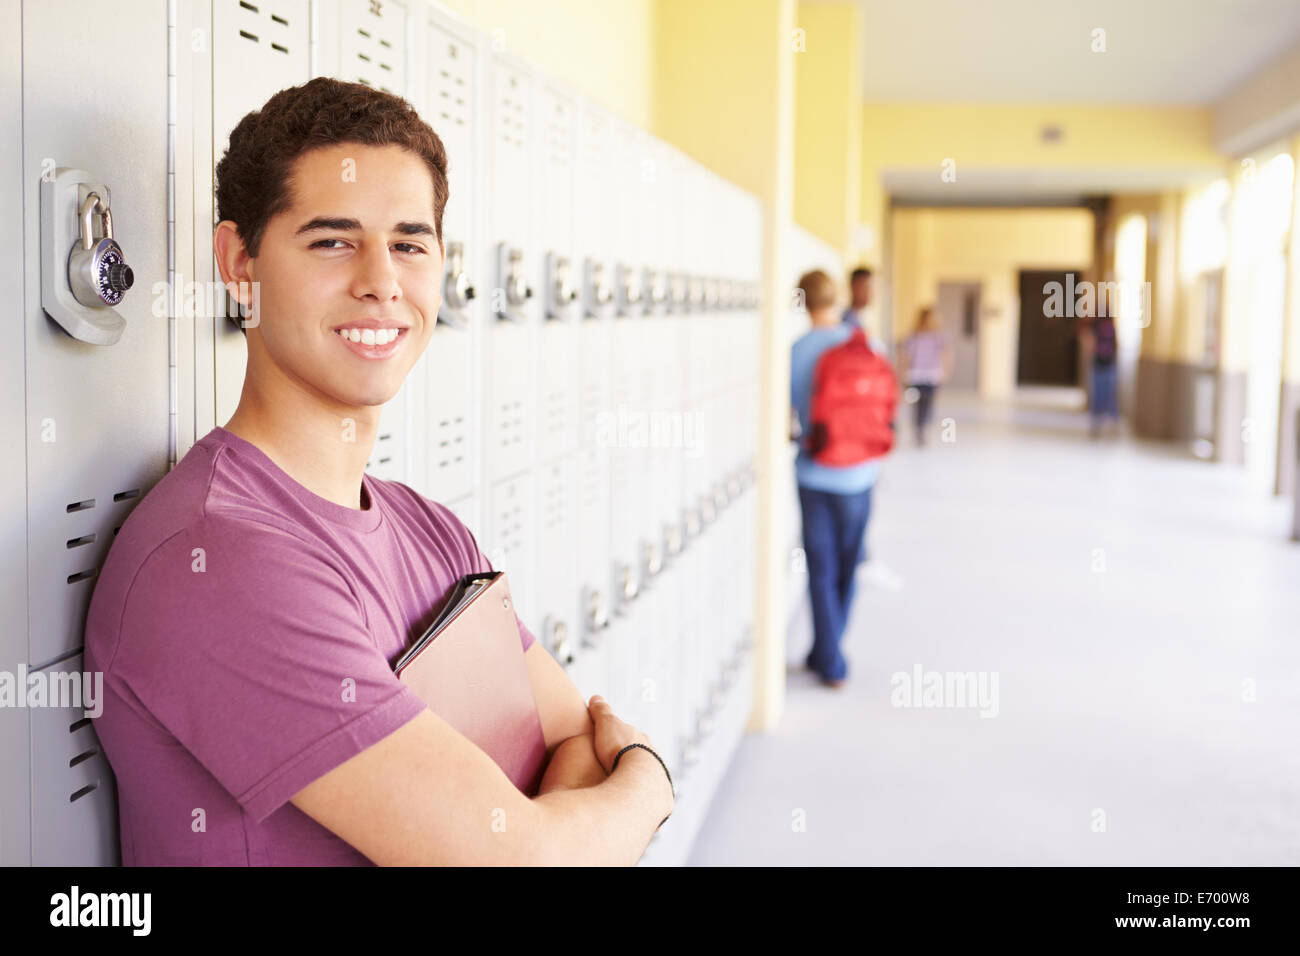 Male High School Student Standing By Lockers Stock Photo